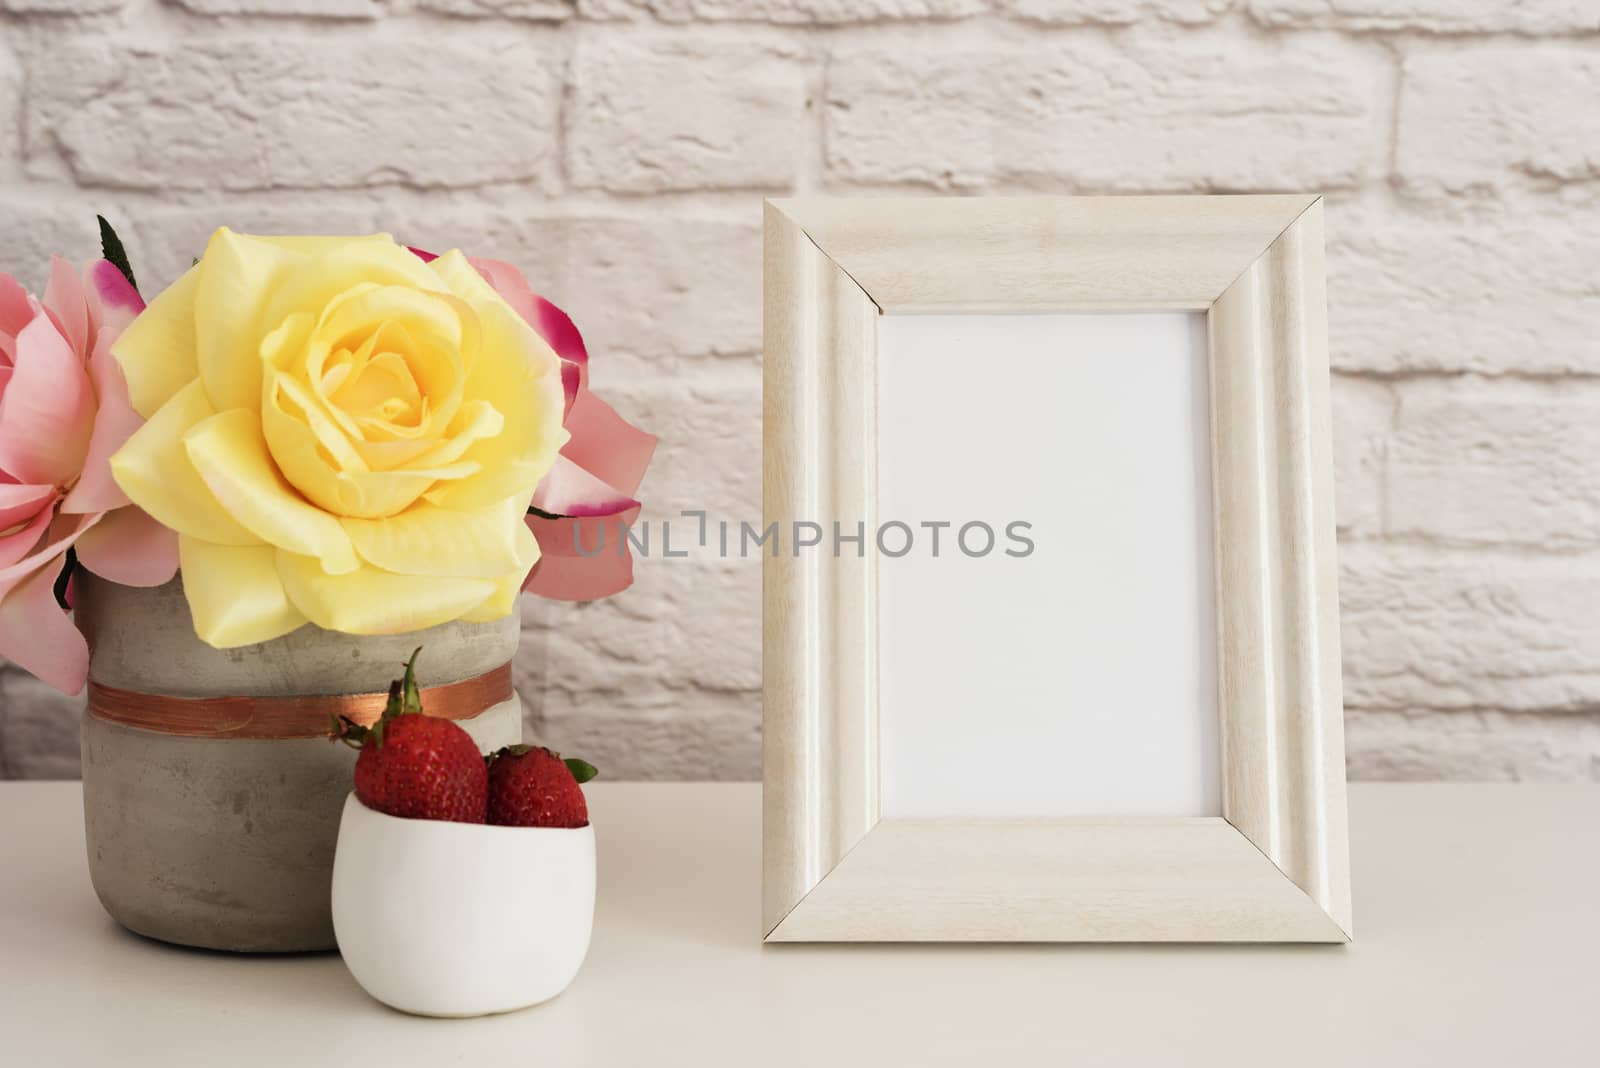 Frame Mockup. White Frame Mock Up. Cream Picture Frame, Vase With Pink Roses, Strawberries In Gold Bowl. Product Frame Mockup. Wall Art Display Template, Brick Wall